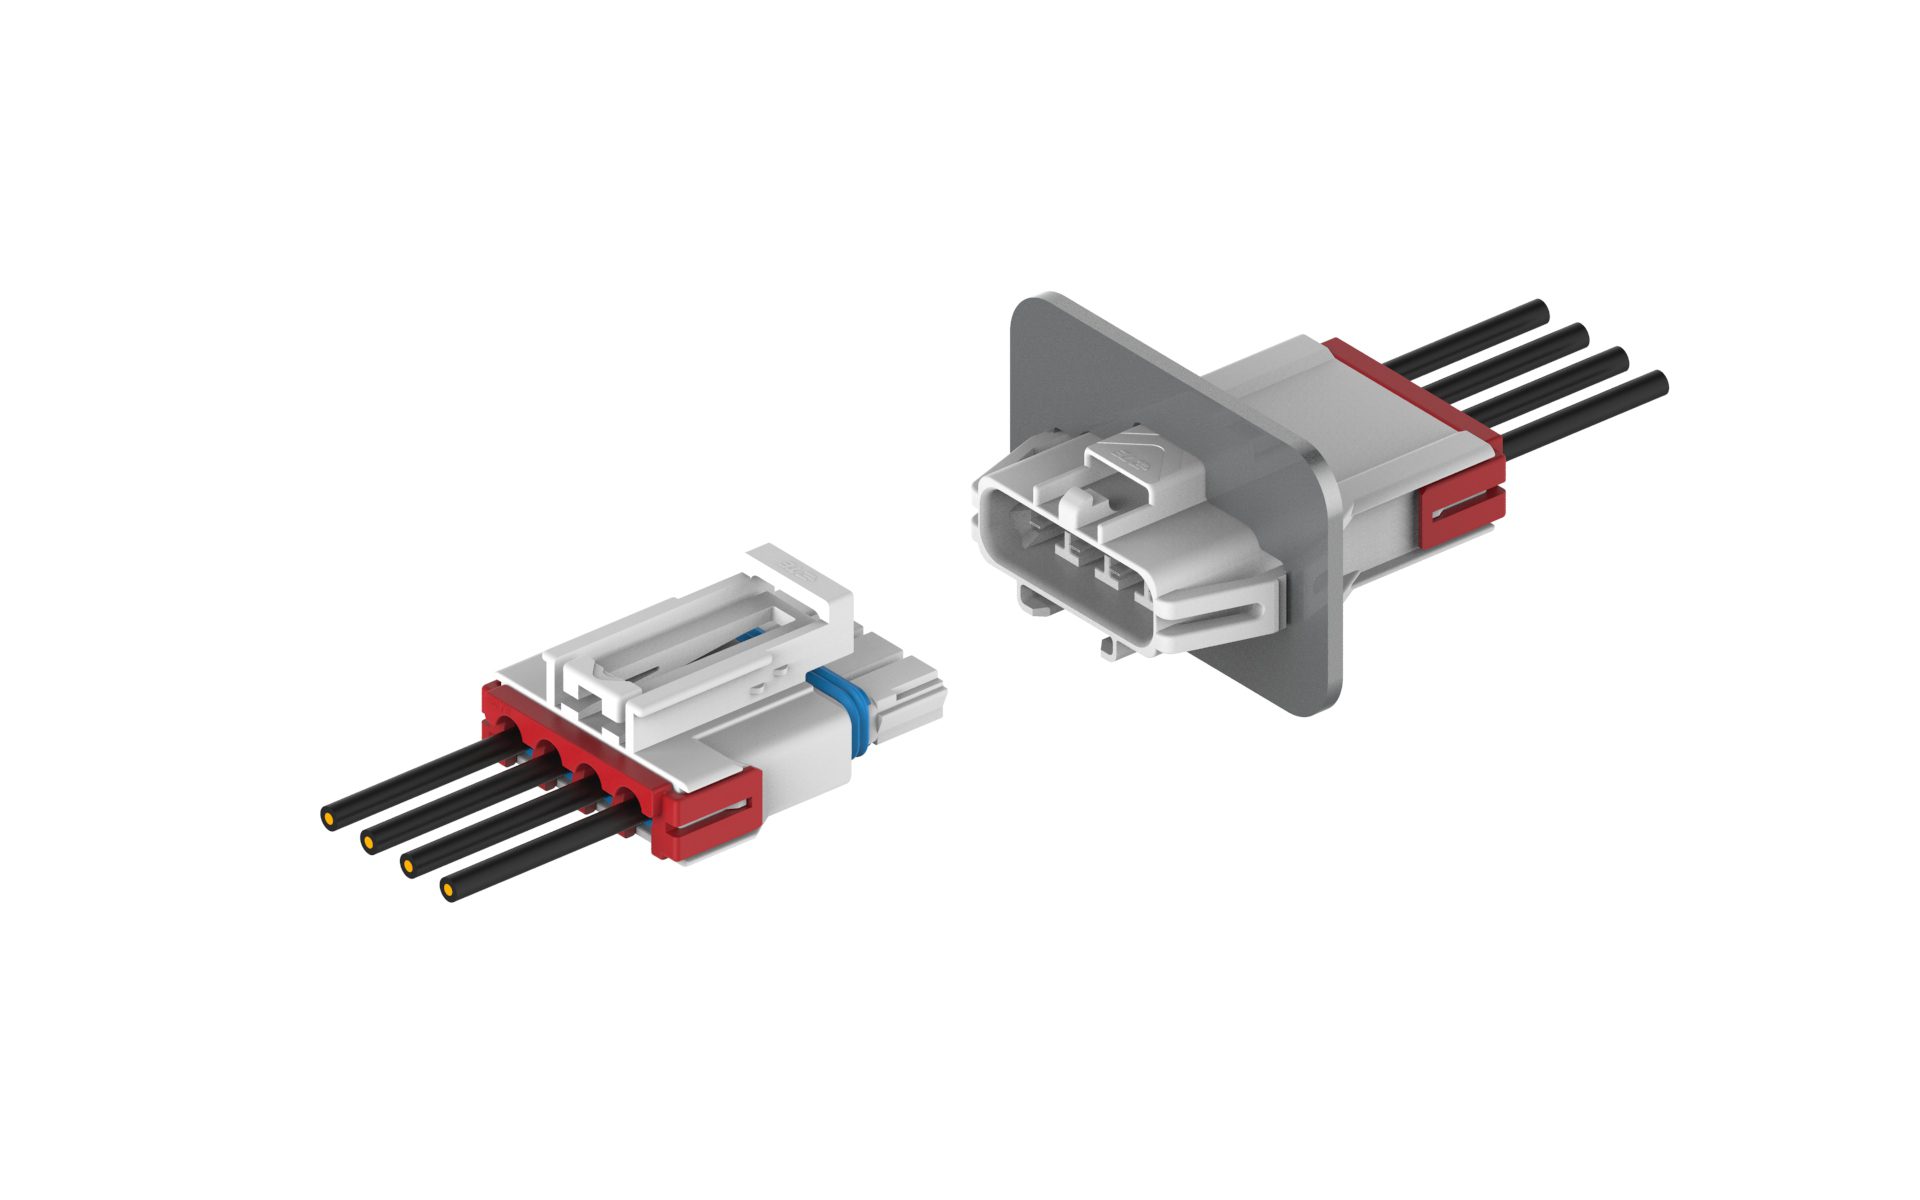 The Power Versa-Lock connector system from TE Connectivity